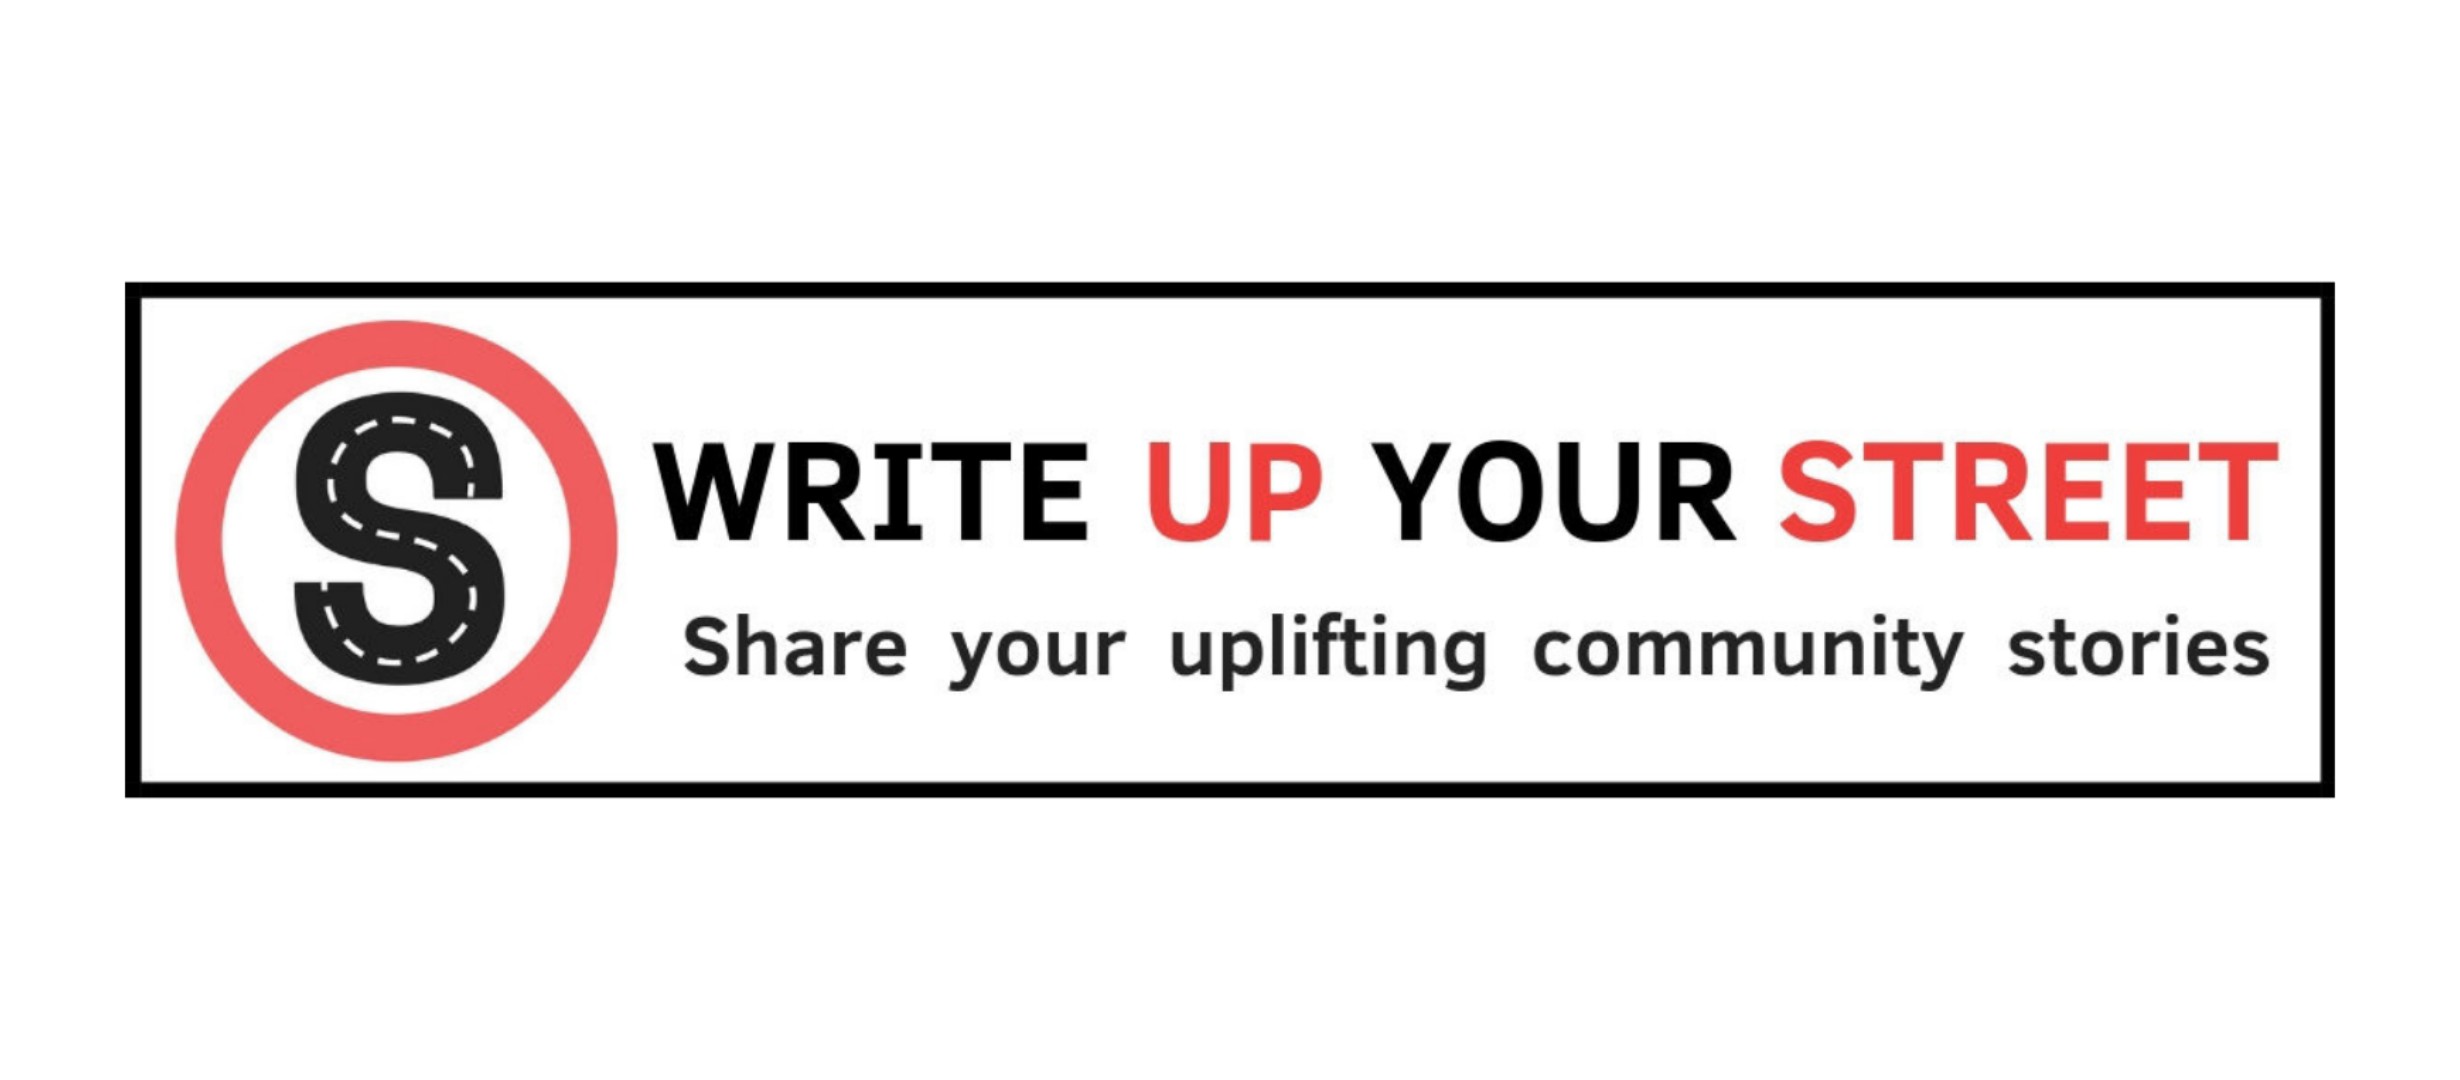 write up your street - share your uplifting community stories